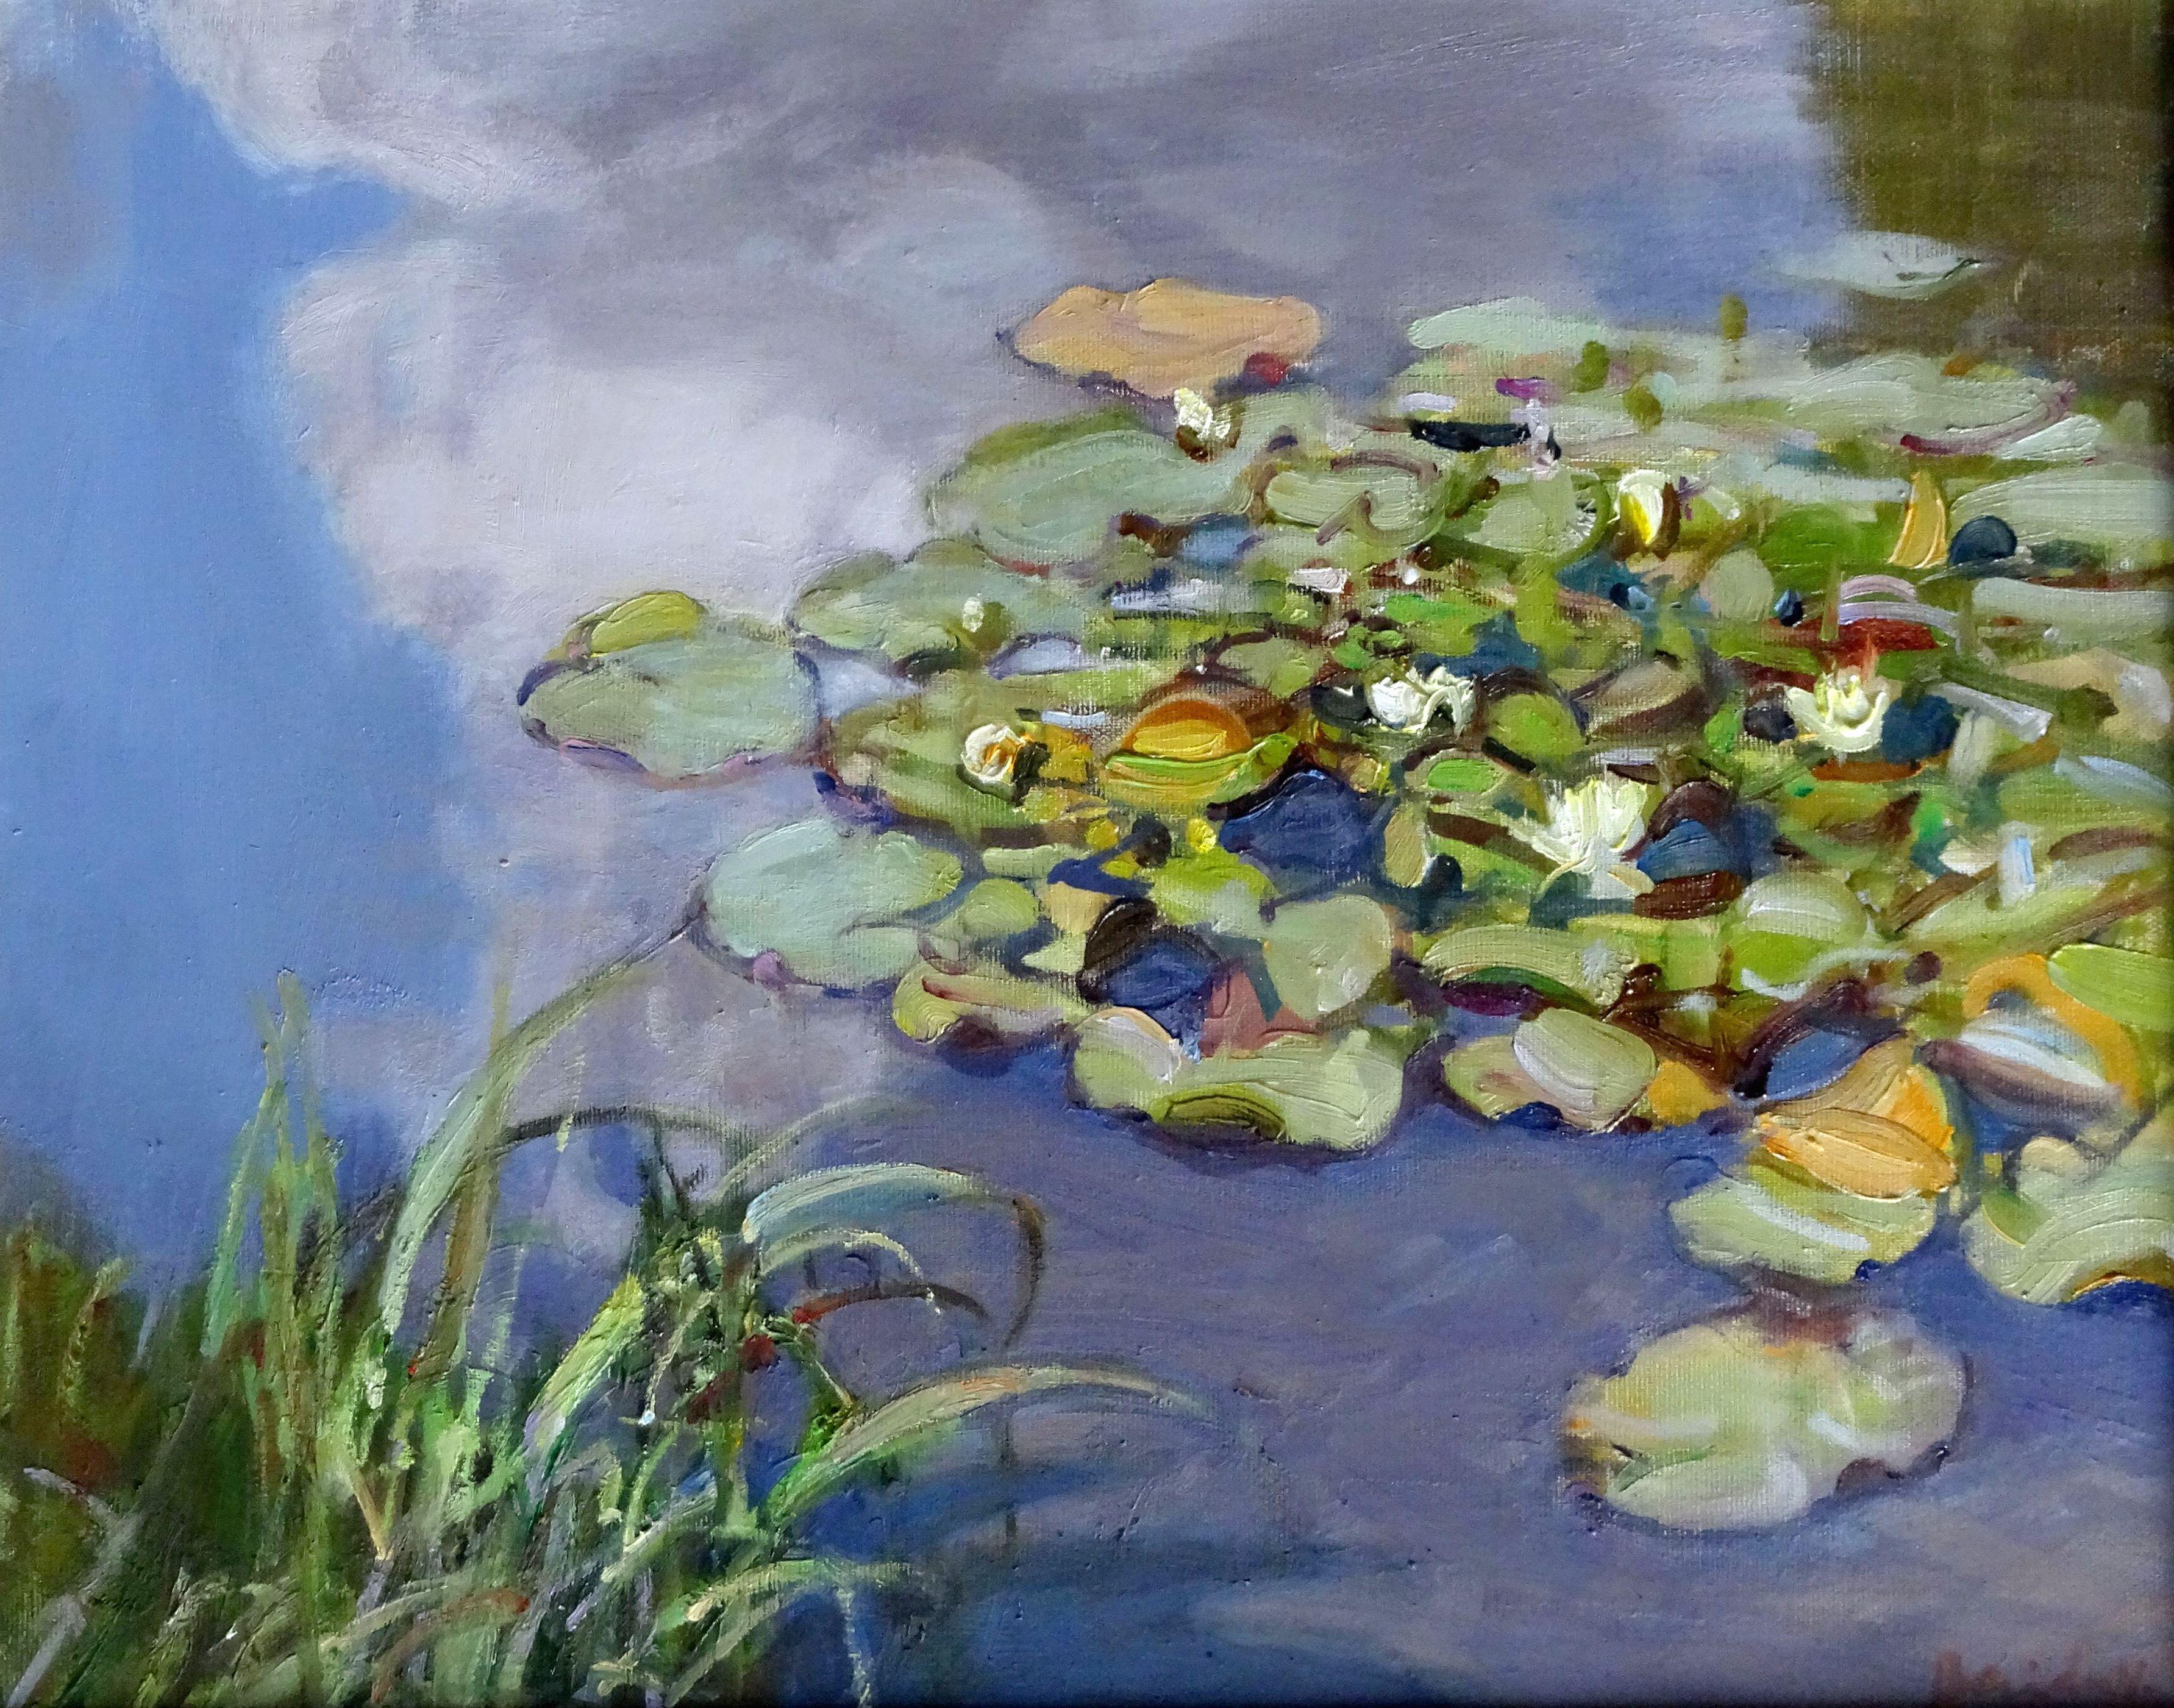 Valery Bayda  Landscape Painting - After the rain. Water lilies. 2018, oil on canvas, 40x50 cm